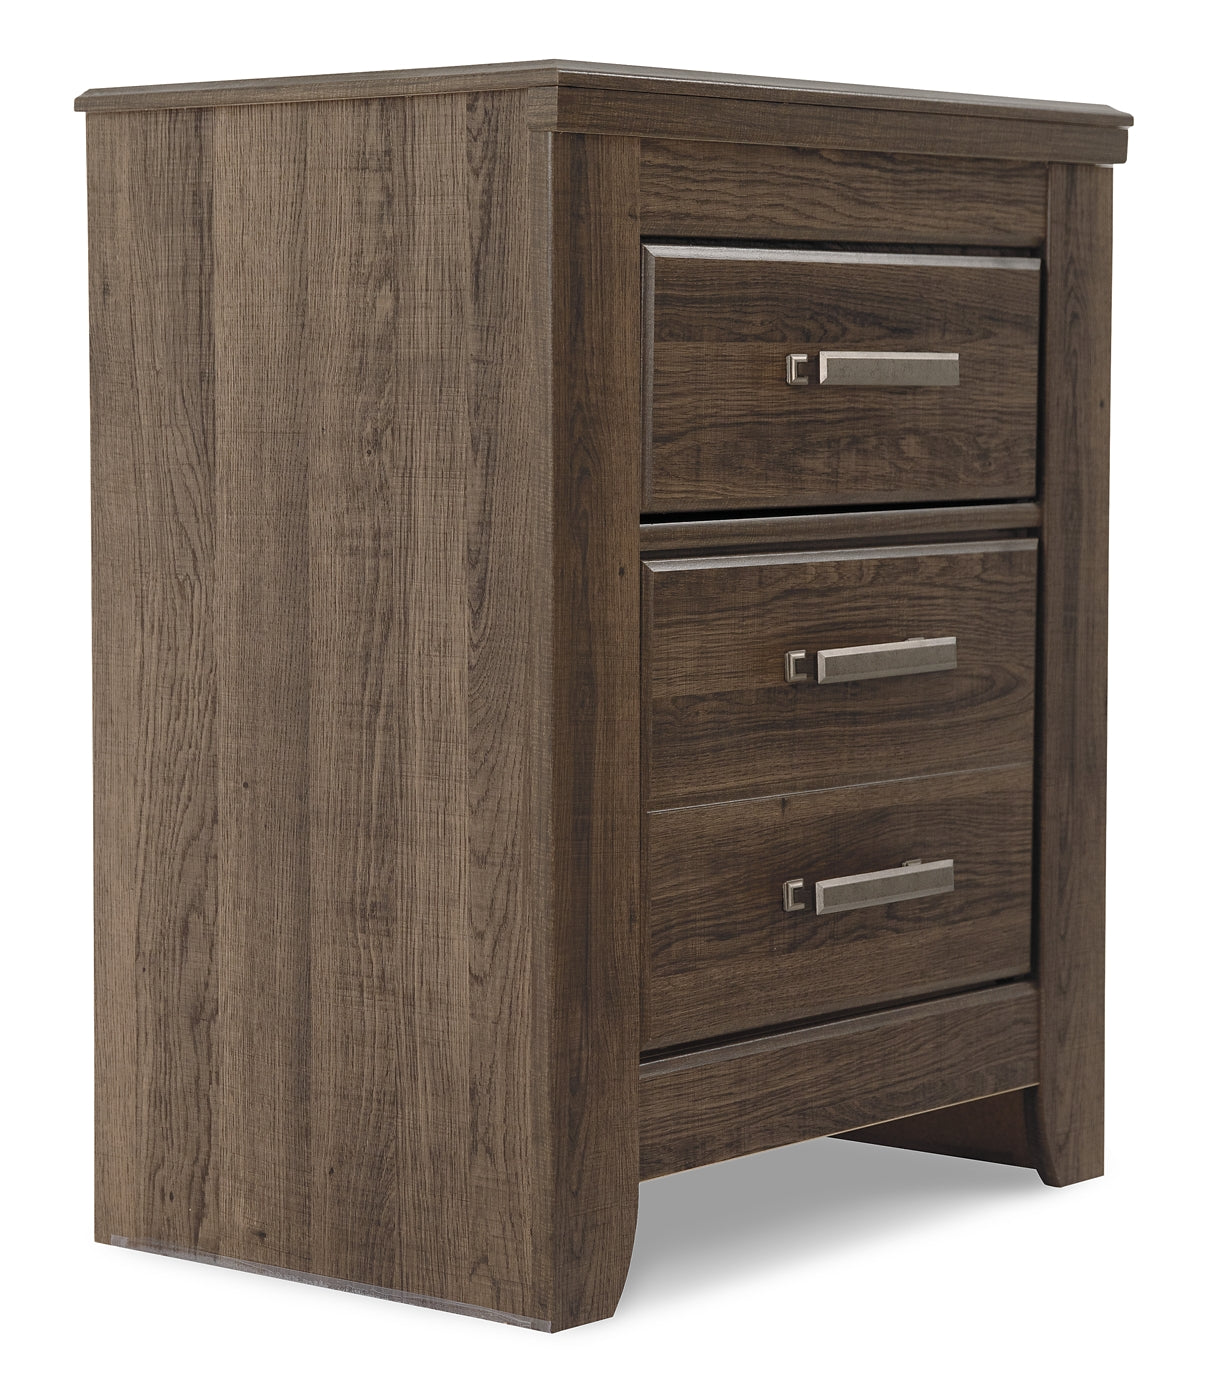 Juararo Queen Panel Bed with Mirrored Dresser, Chest and 2 Nightstands Smyrna Furniture Outlet